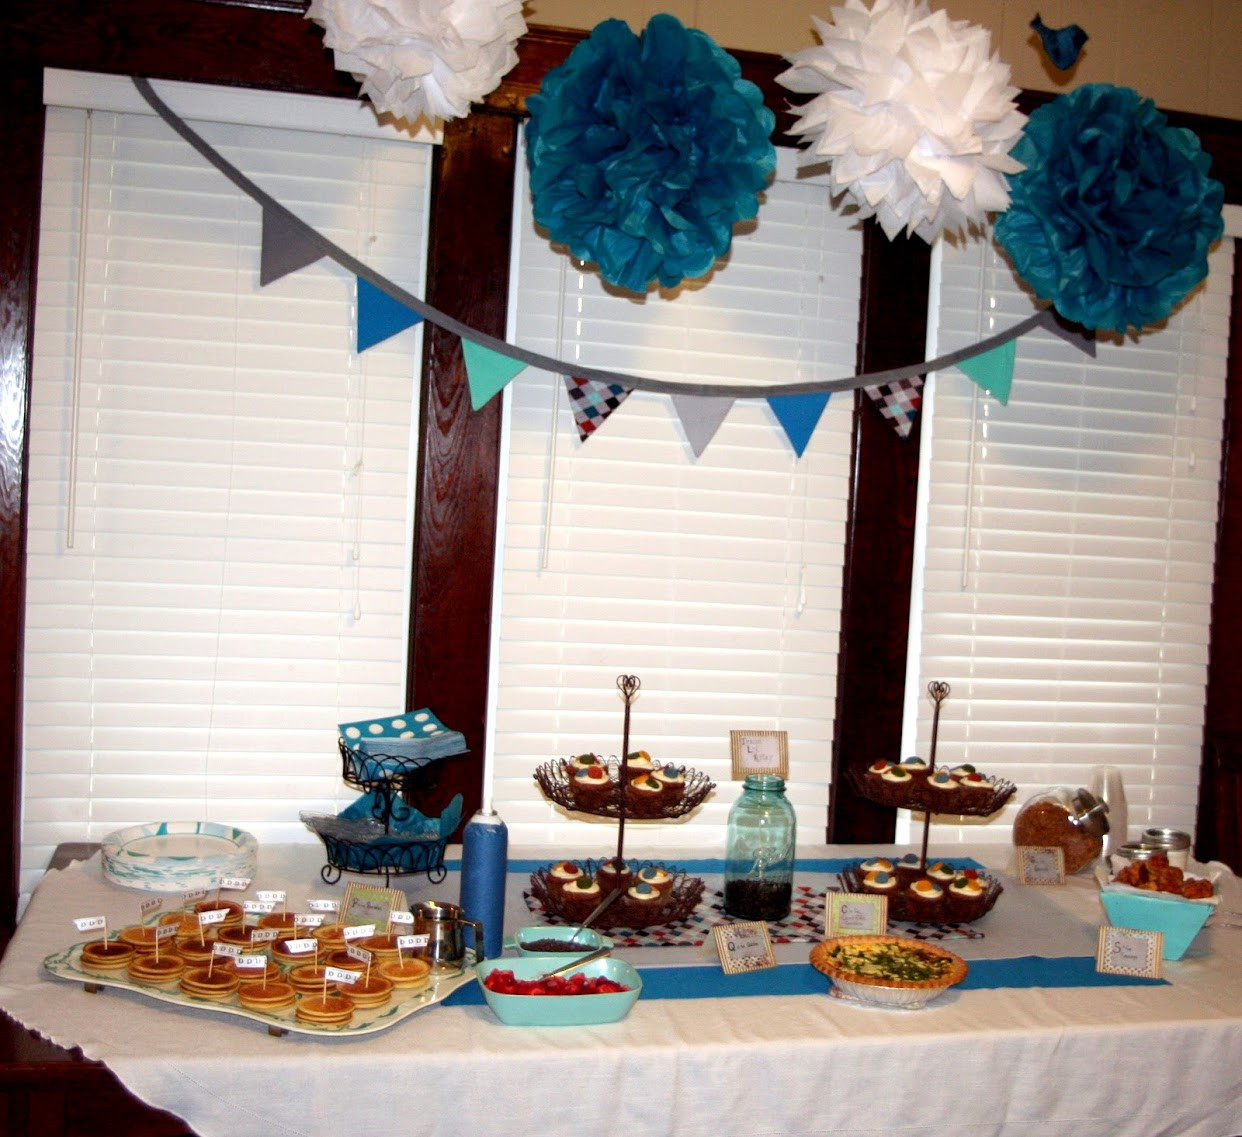 Baby Shower Decoration Ideas For A Boy
 Baby Shower Decorations For Boys Ideas